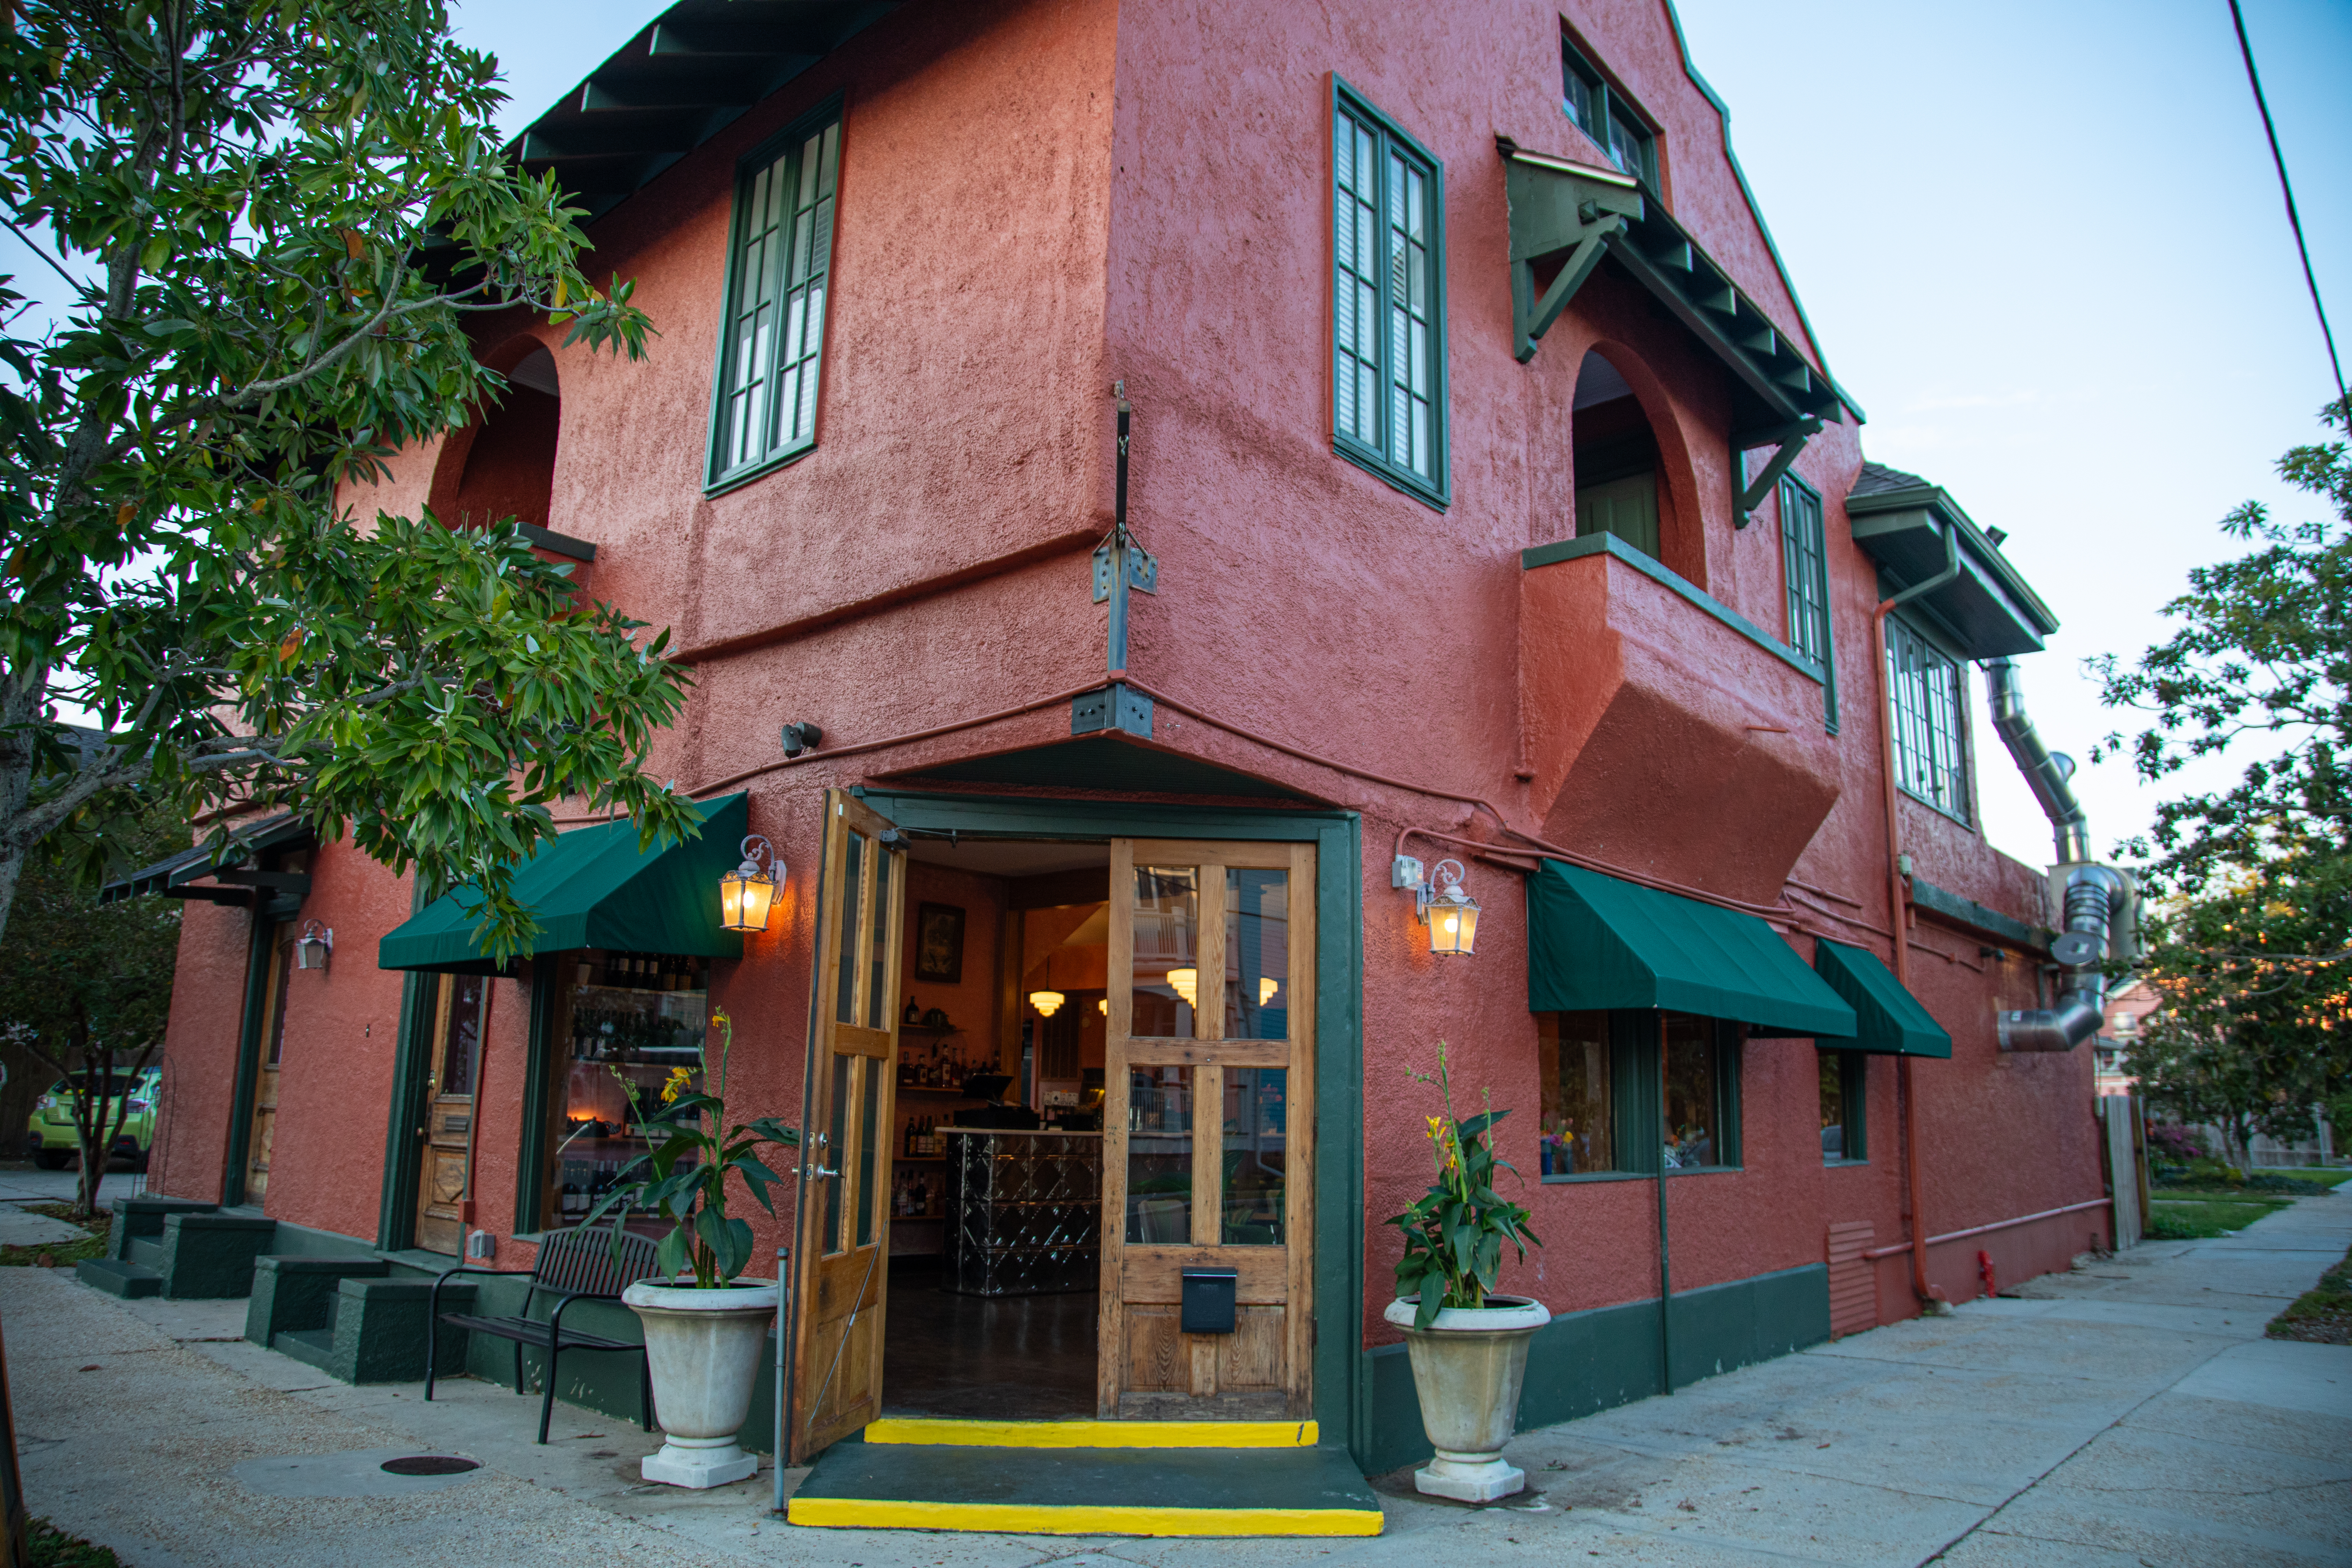 A corner building with a muted red facade and green awnings and window trim. 